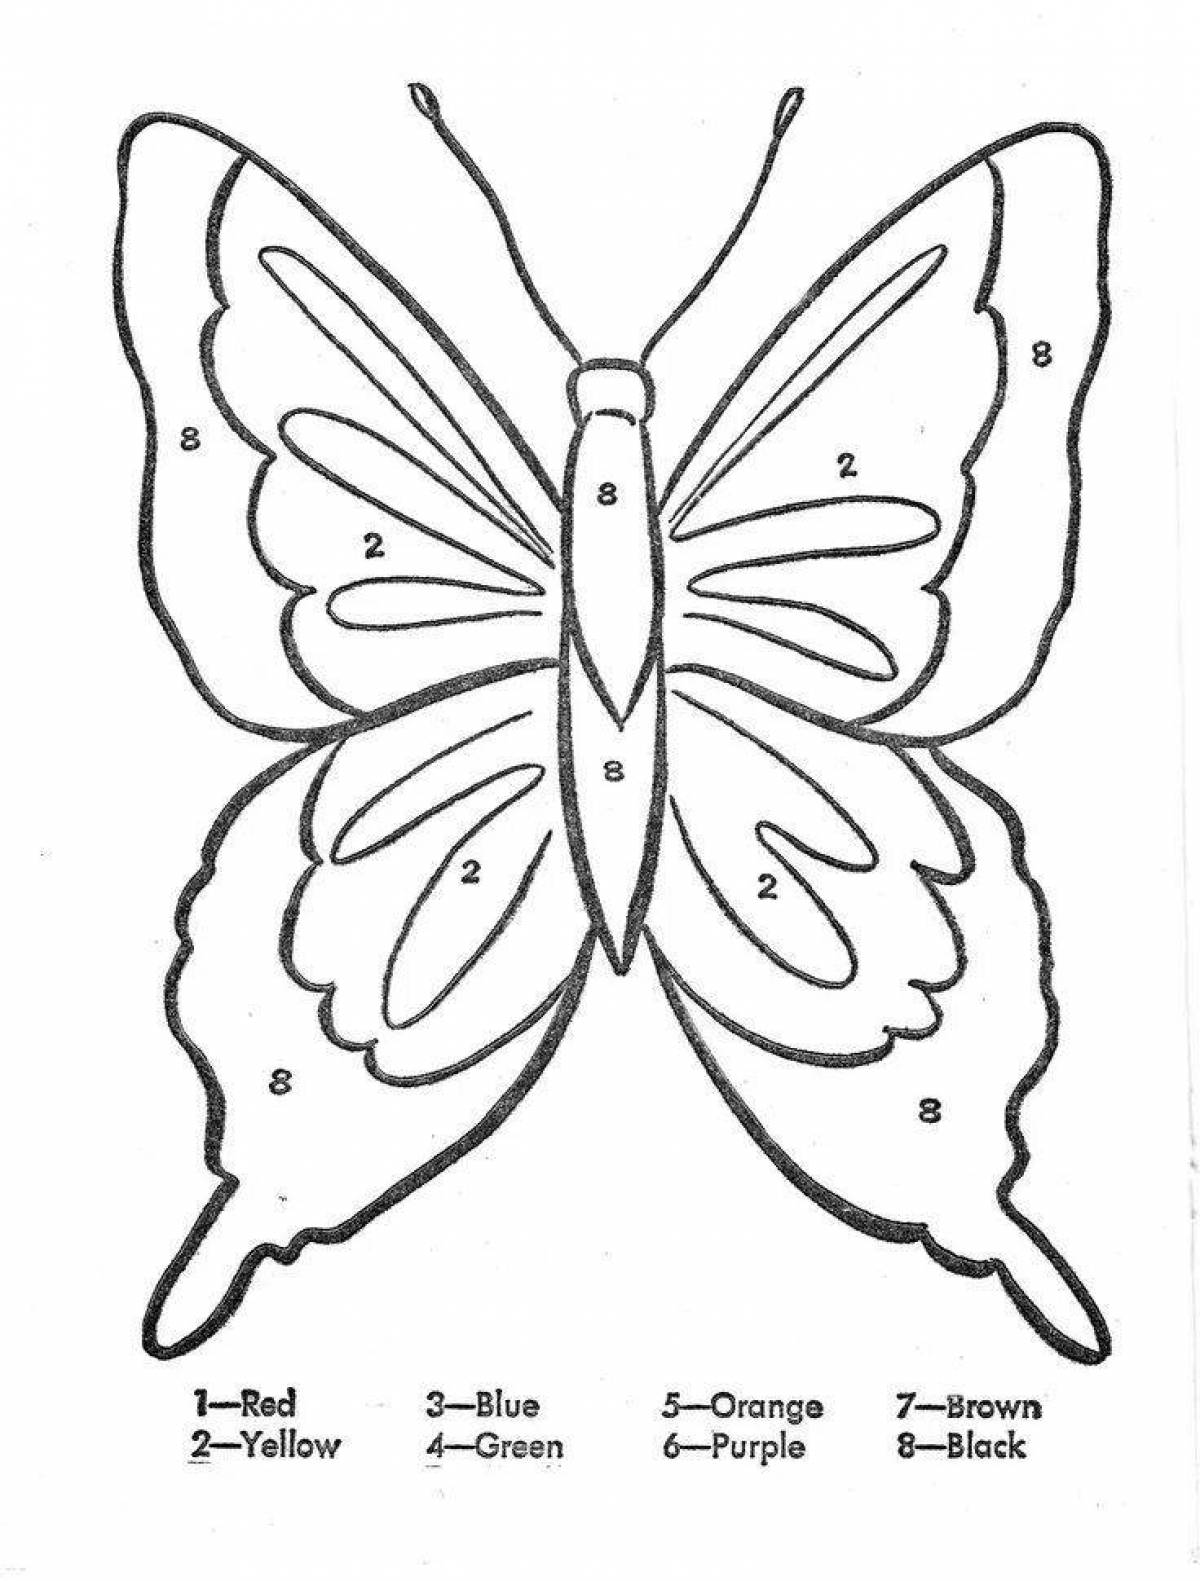 Coloured coloring book for children